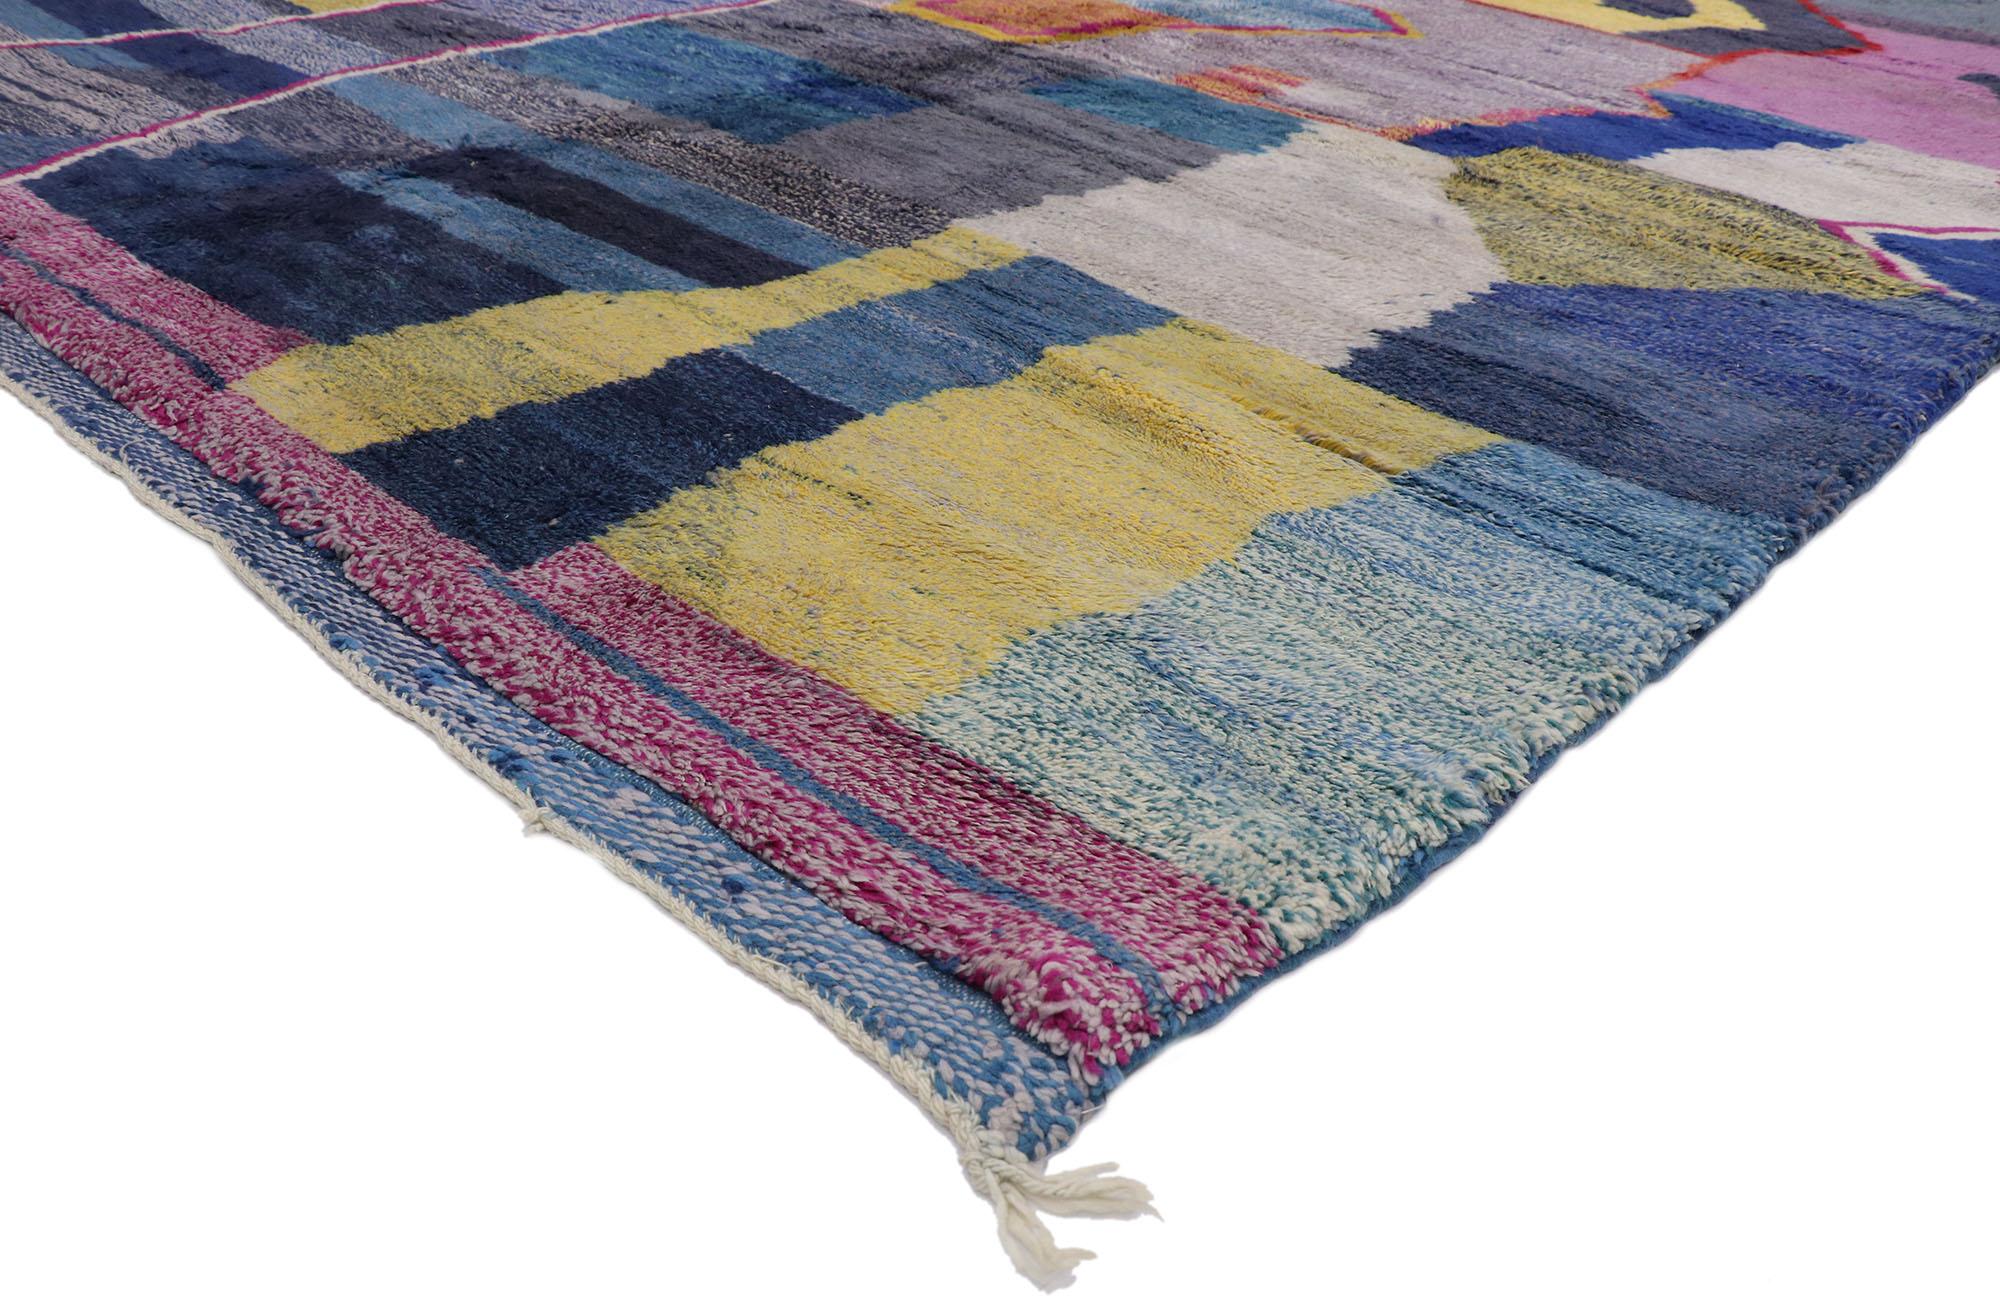 21118 New Contemporary Berber Moroccan rug inspired by Helen Frankenthaler 09'07 x 12'04. Showcasing a bold expressive design, incredible detail and texture, this hand knotted wool contemporary Berber Moroccan rug is a captivating vision of woven